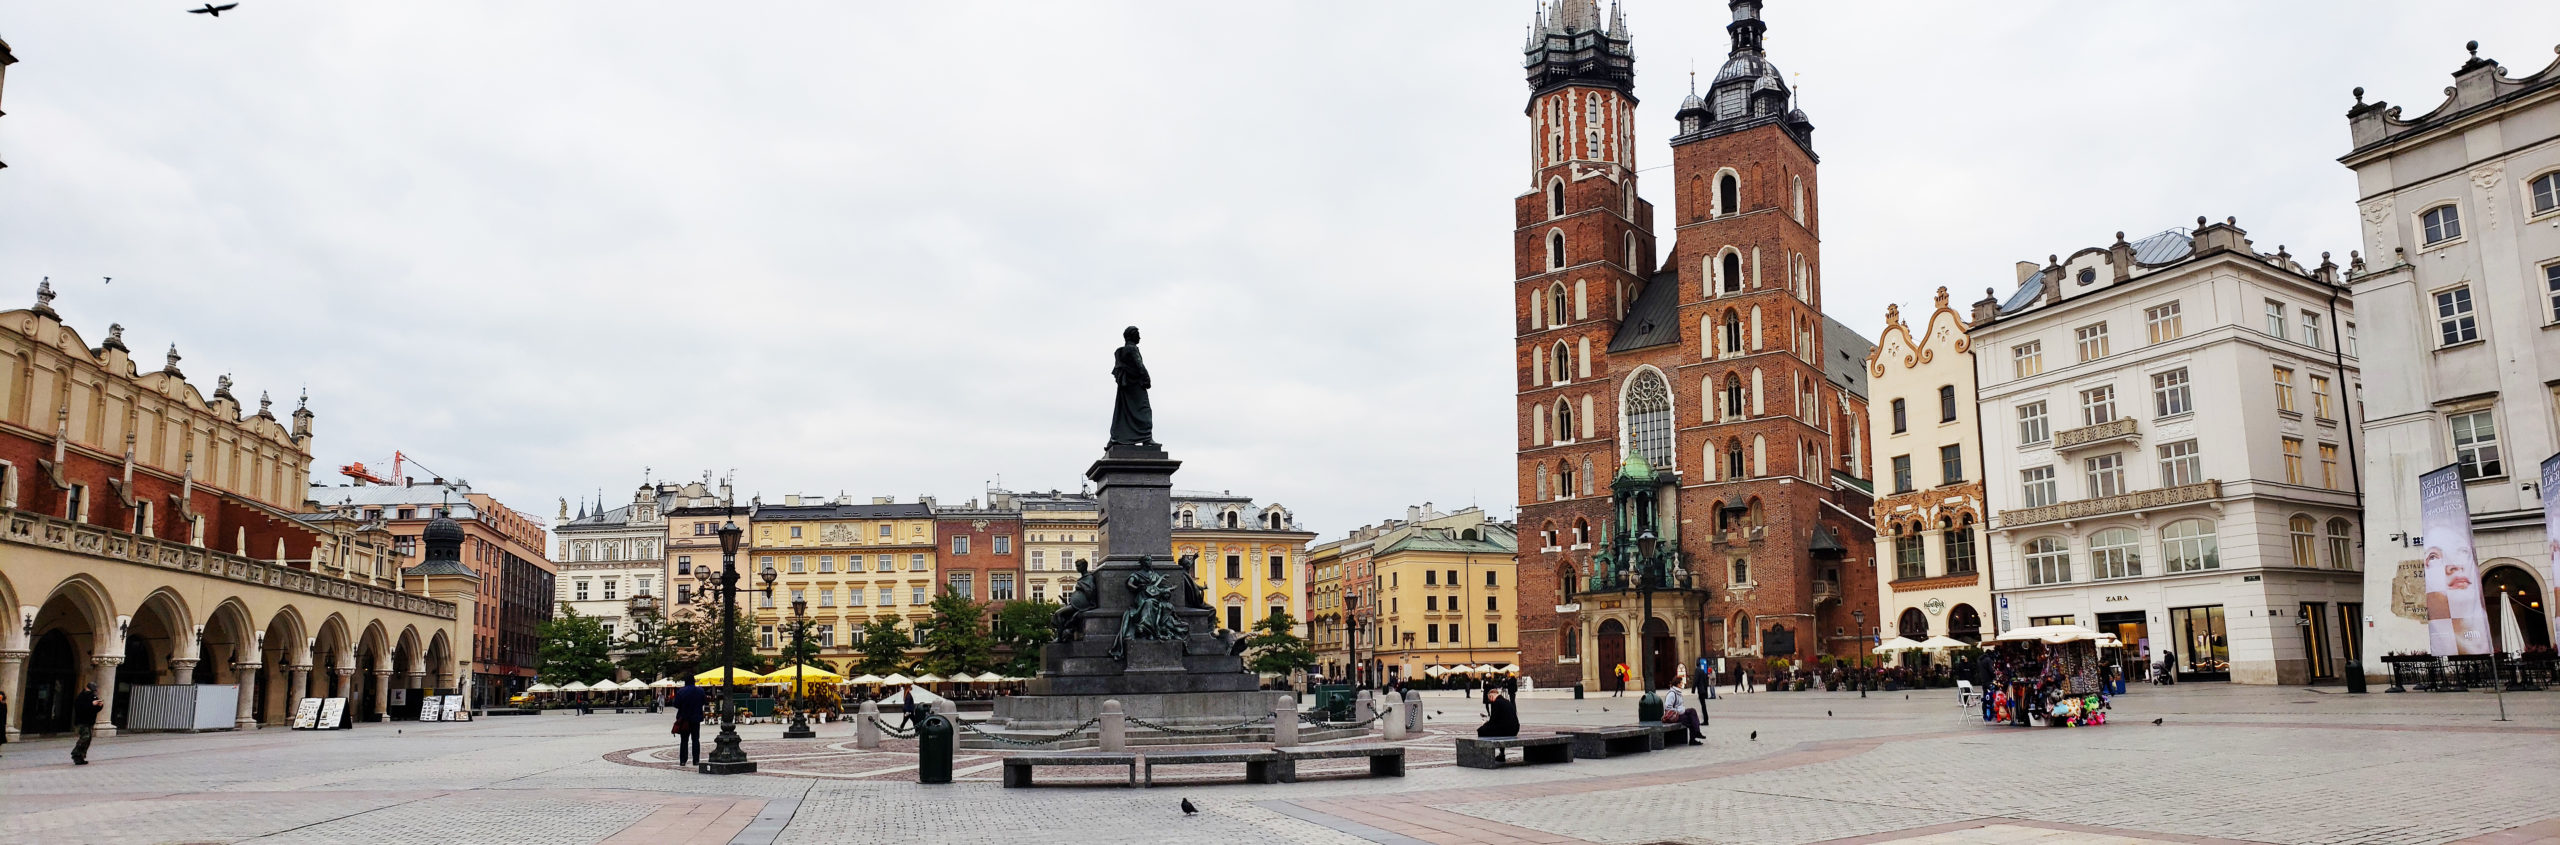 Is Poland Safe To Travel To As A Solo Female Traveller